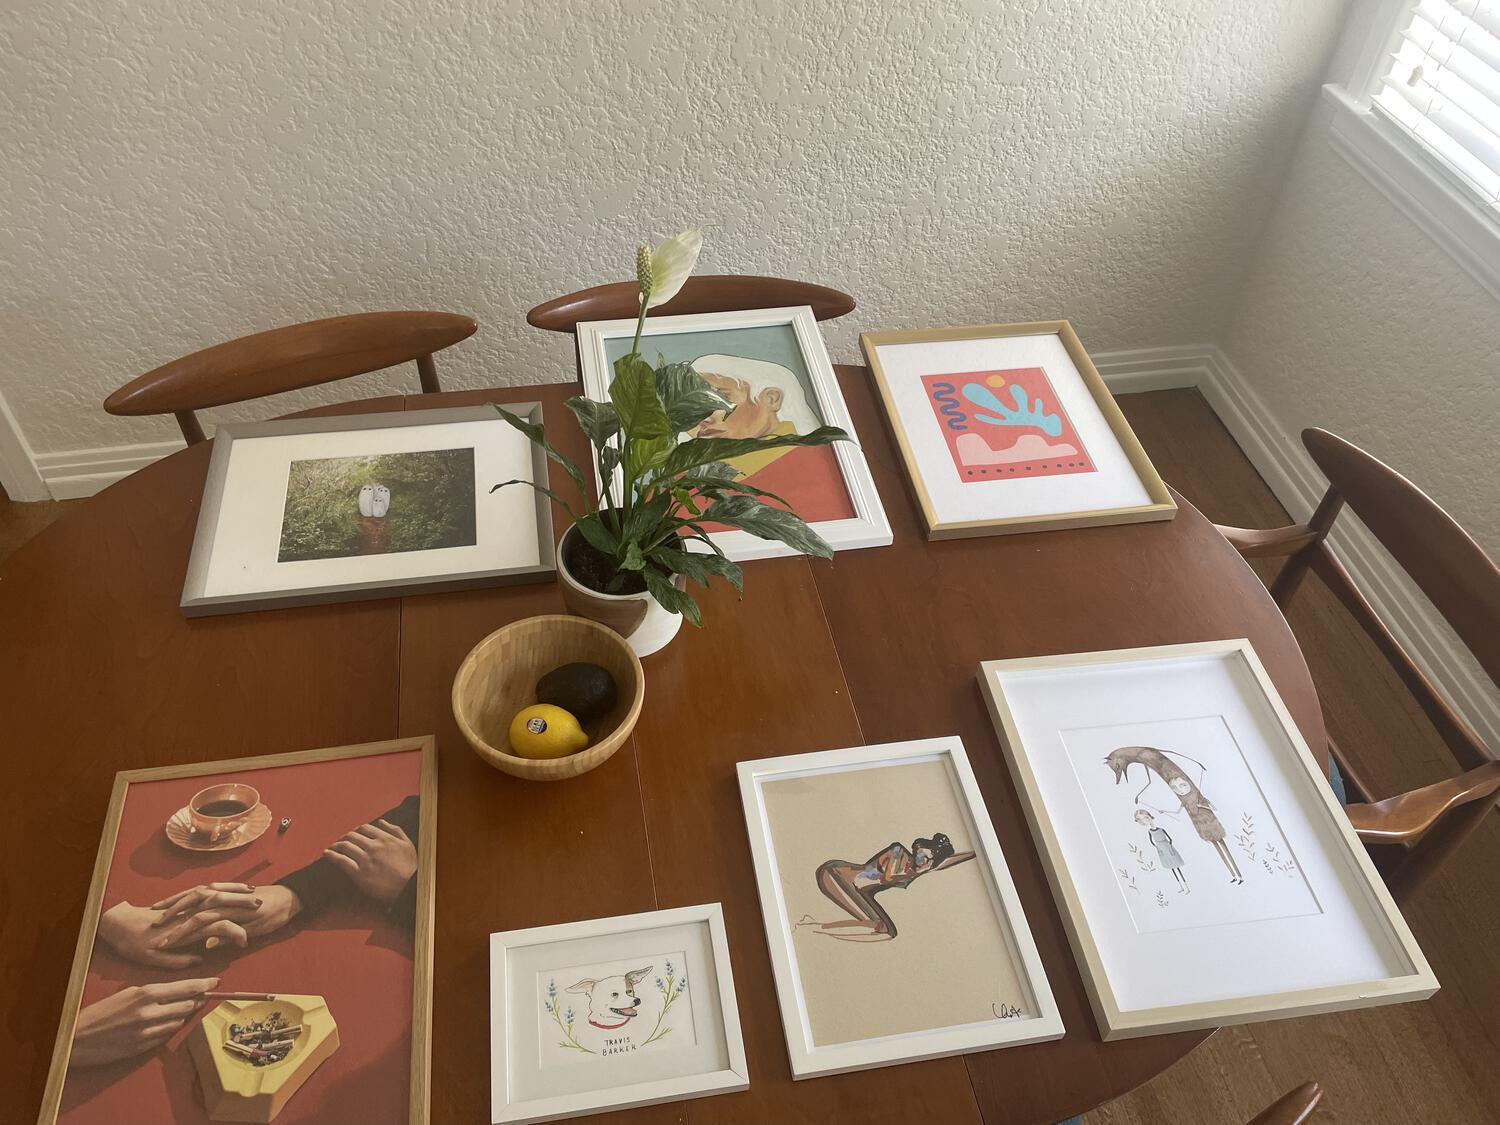 Framed prints and photographs arranged on the dining table in the way they'll be mounted on the wall